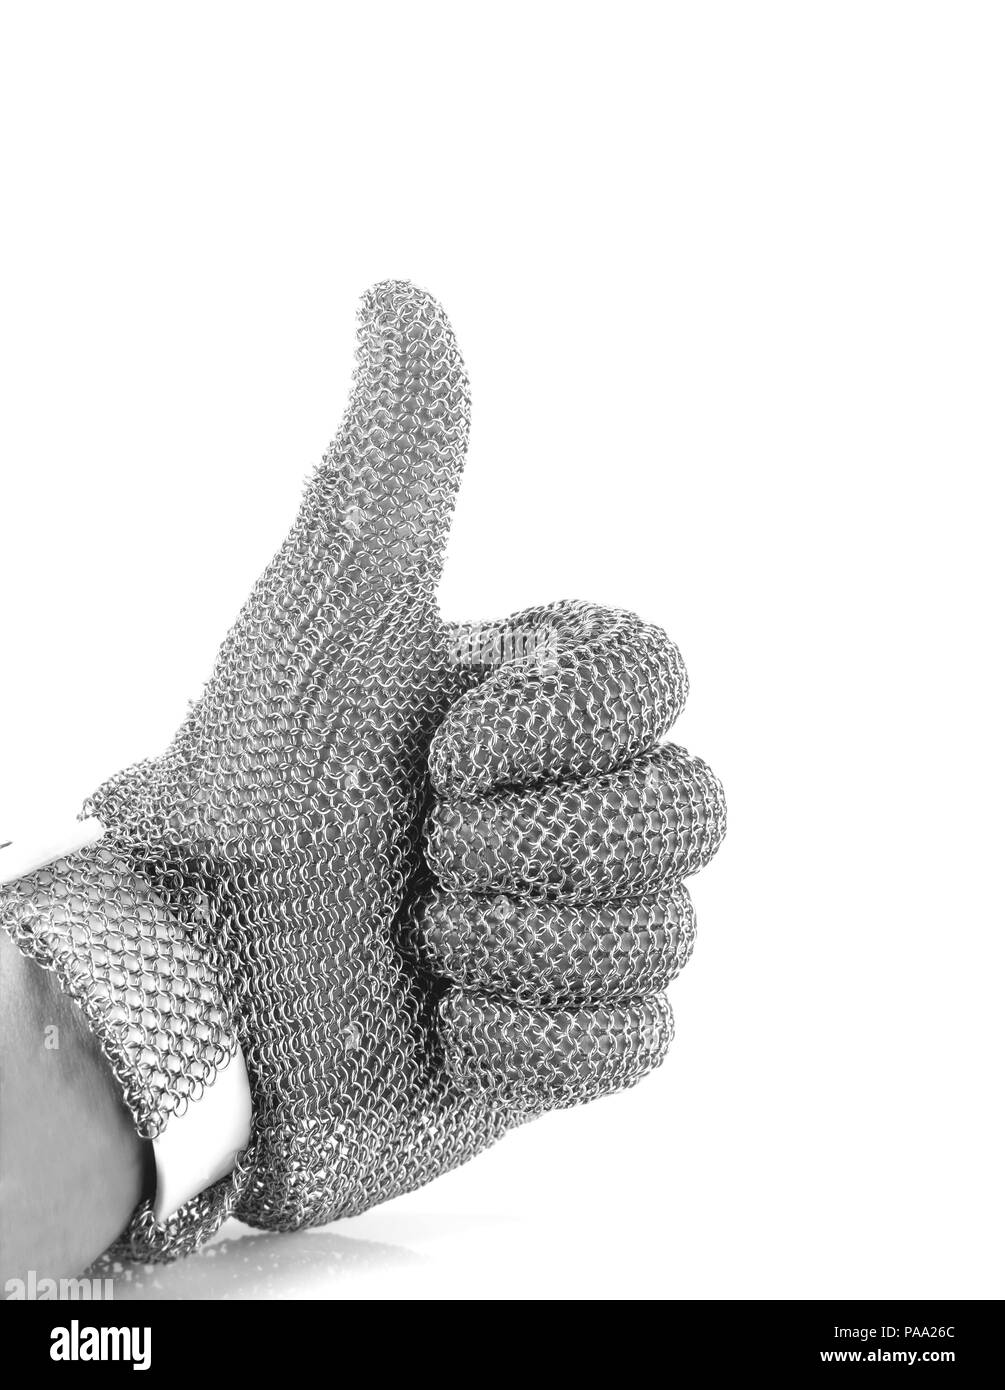 Hand with iron mesh glove on white background. Protection devices for industrial applications. Black and white tone. Stock Photo